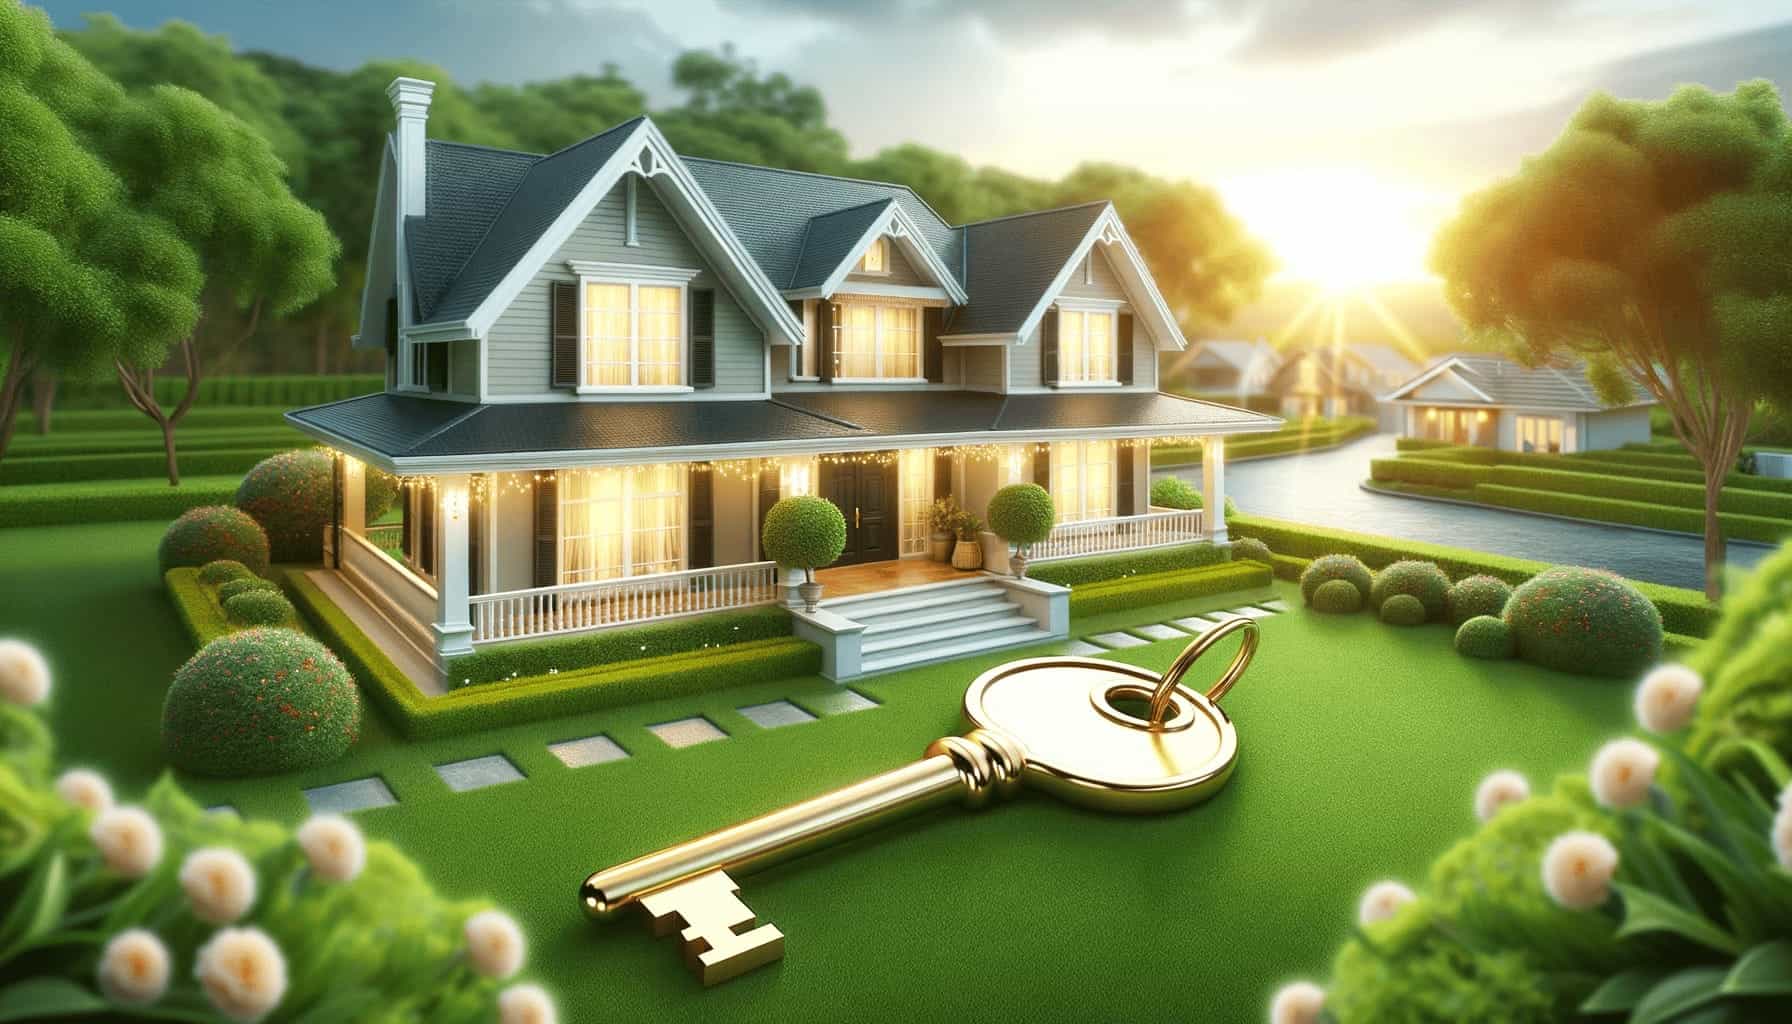 DALL·E 2023 10 17 18.31.22 Photo of a beautiful home with a green lawn and a golden key floating above it symbolizing approved home financing